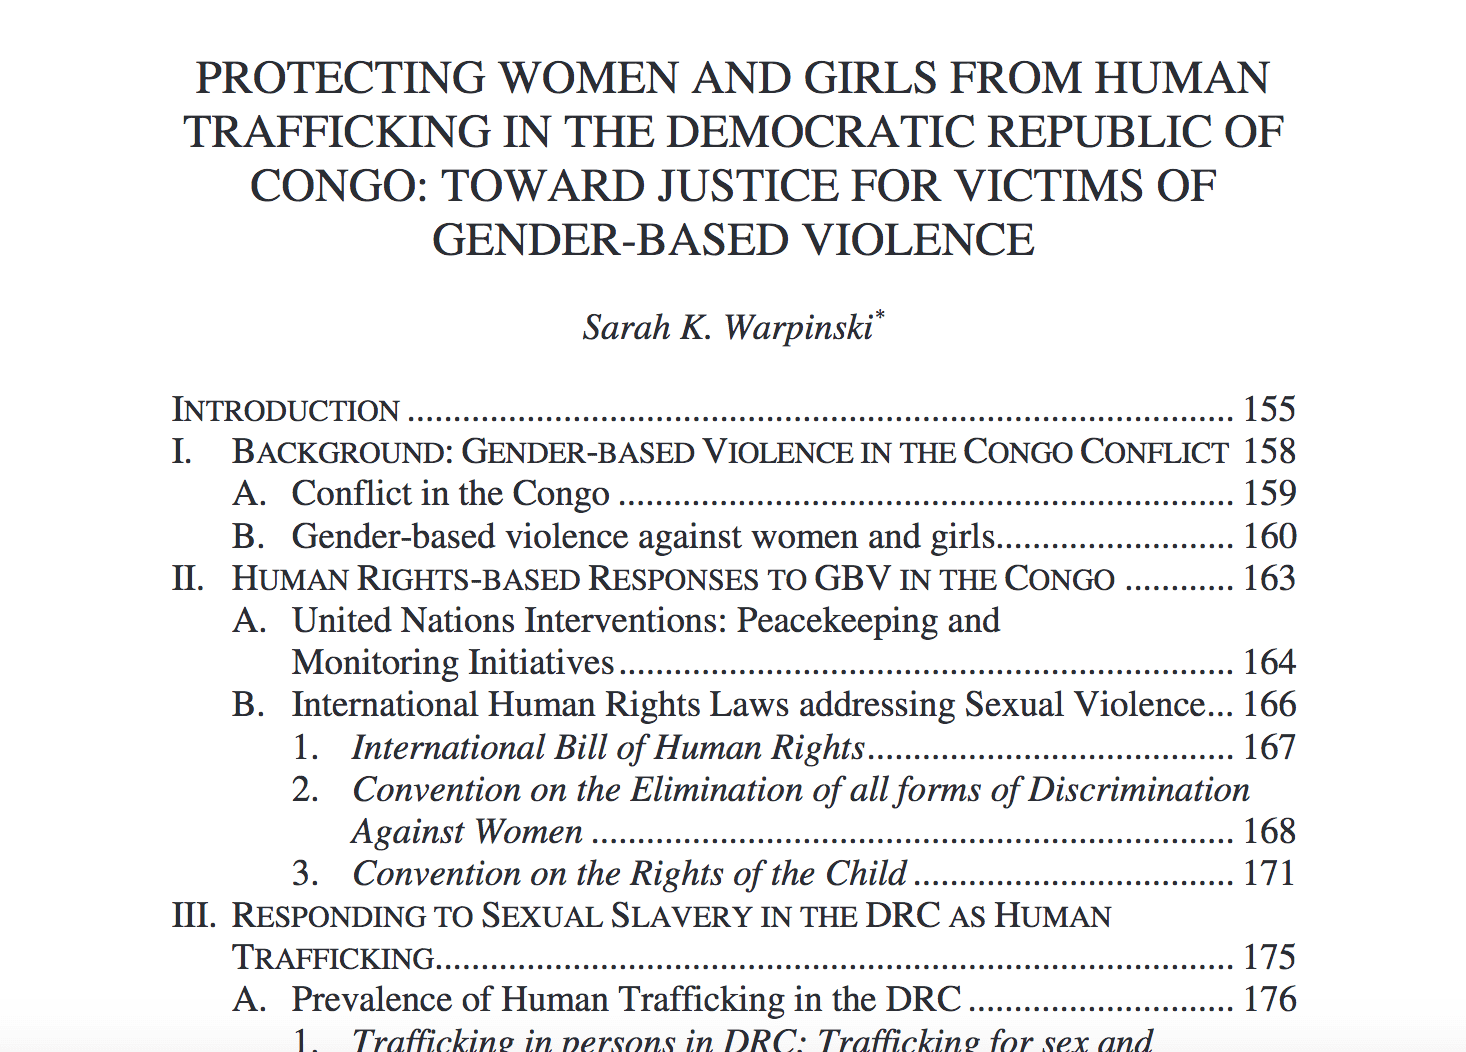 Protecting women and girls from human trafficking in the Democratic Republic of Congo: Toward justice for victims of gender-based violence